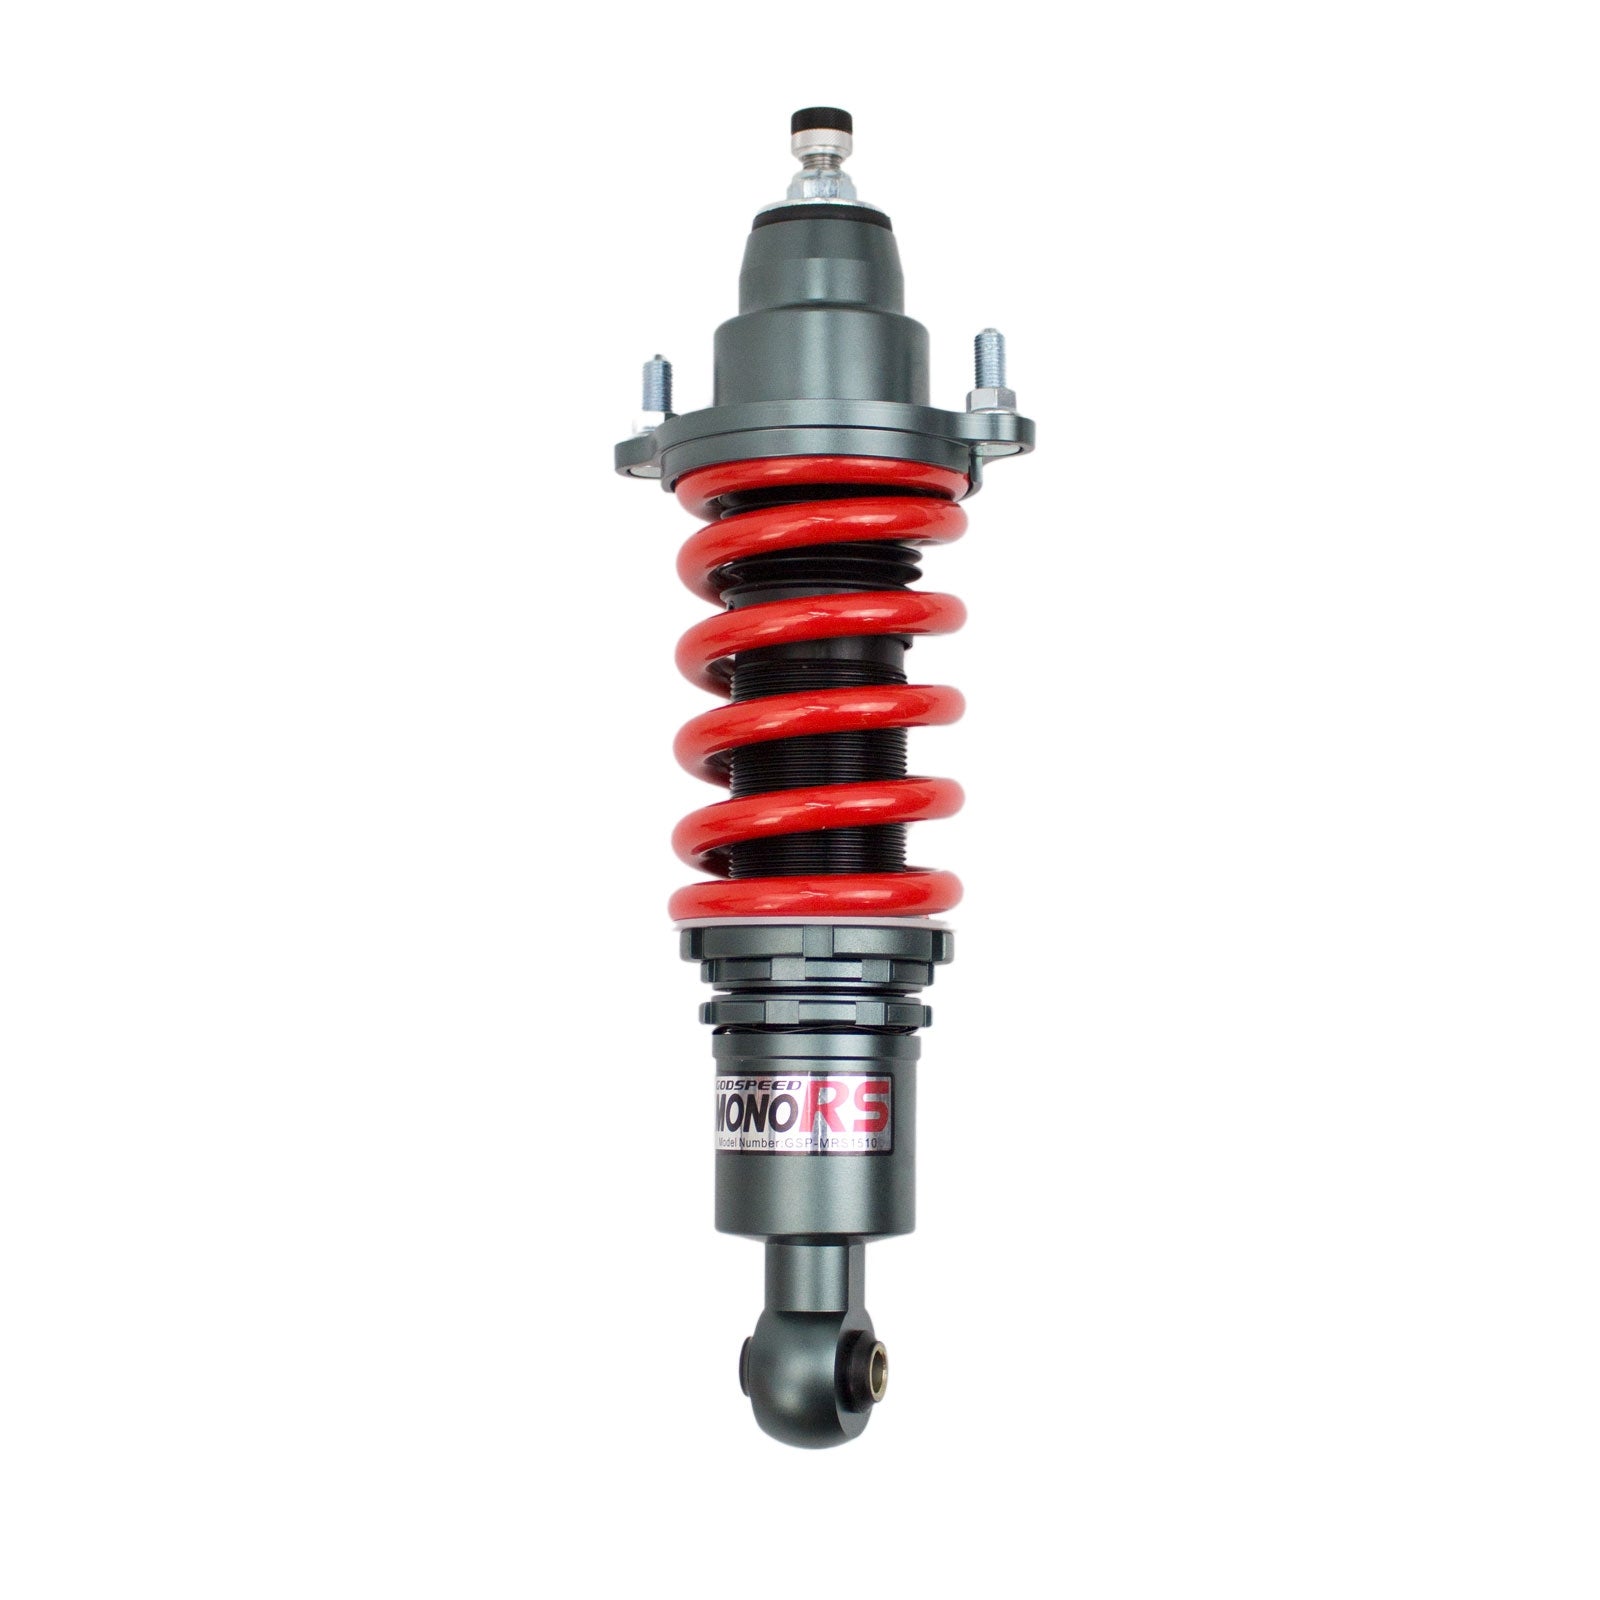 Godspeed MRS1510-B MonoRS Coilover Lowering Kit, 32 Damping Adjustment, Ride Height Adjustable